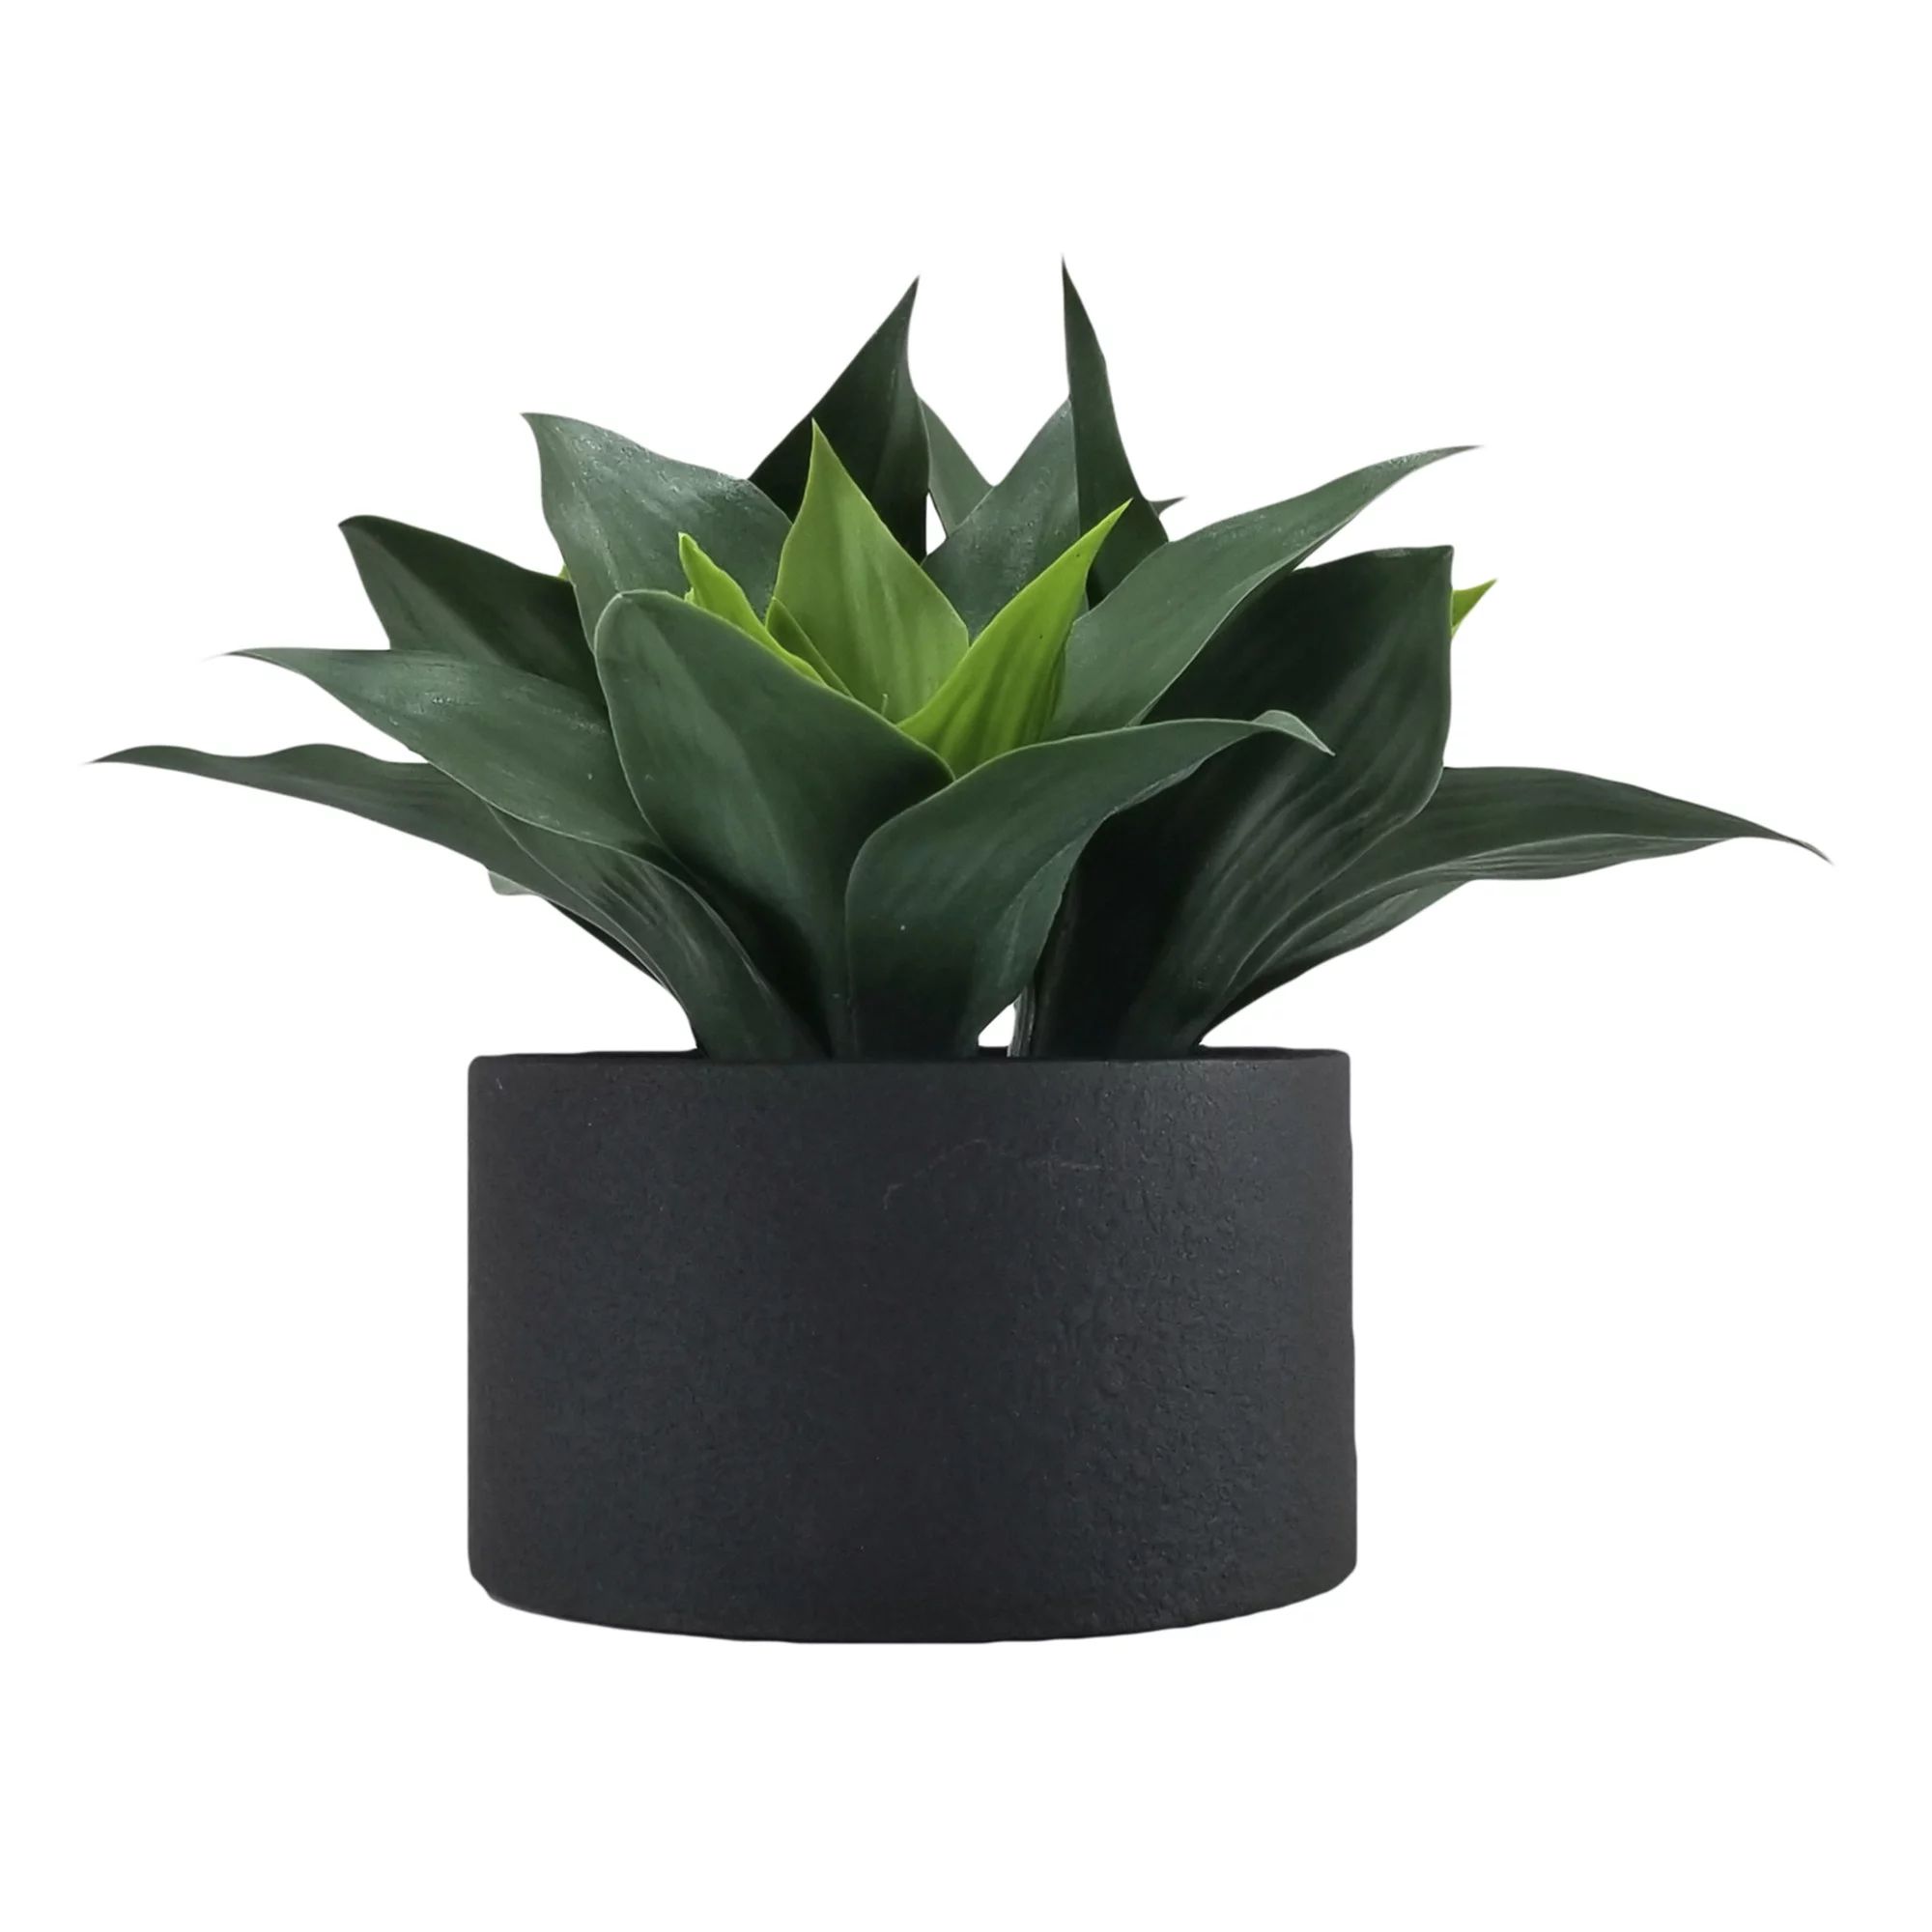 9.25" Artificial Agave Plant in Black Metal Pot by Better Homes & Gardens | Walmart (US)